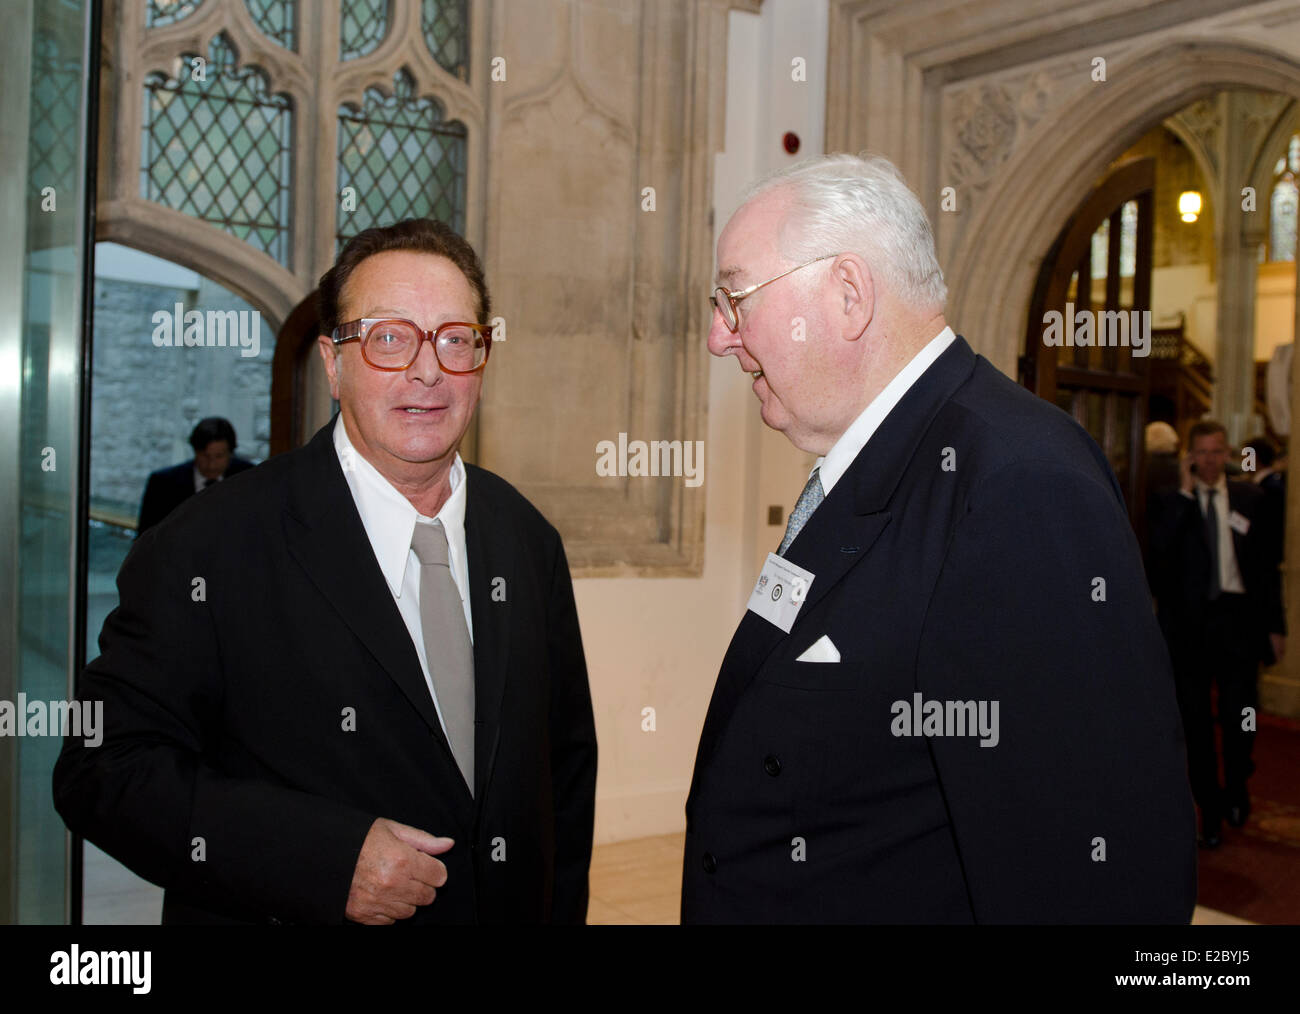 London, UK, 18th June, 2014. Baron Maurice Saatchi and Sir Henry Keswick at the Margaret Thatcher Conference on Liberty 18th June 2014 Guildhall London uk Credit:  Prixnews/Alamy Live News Stock Photo